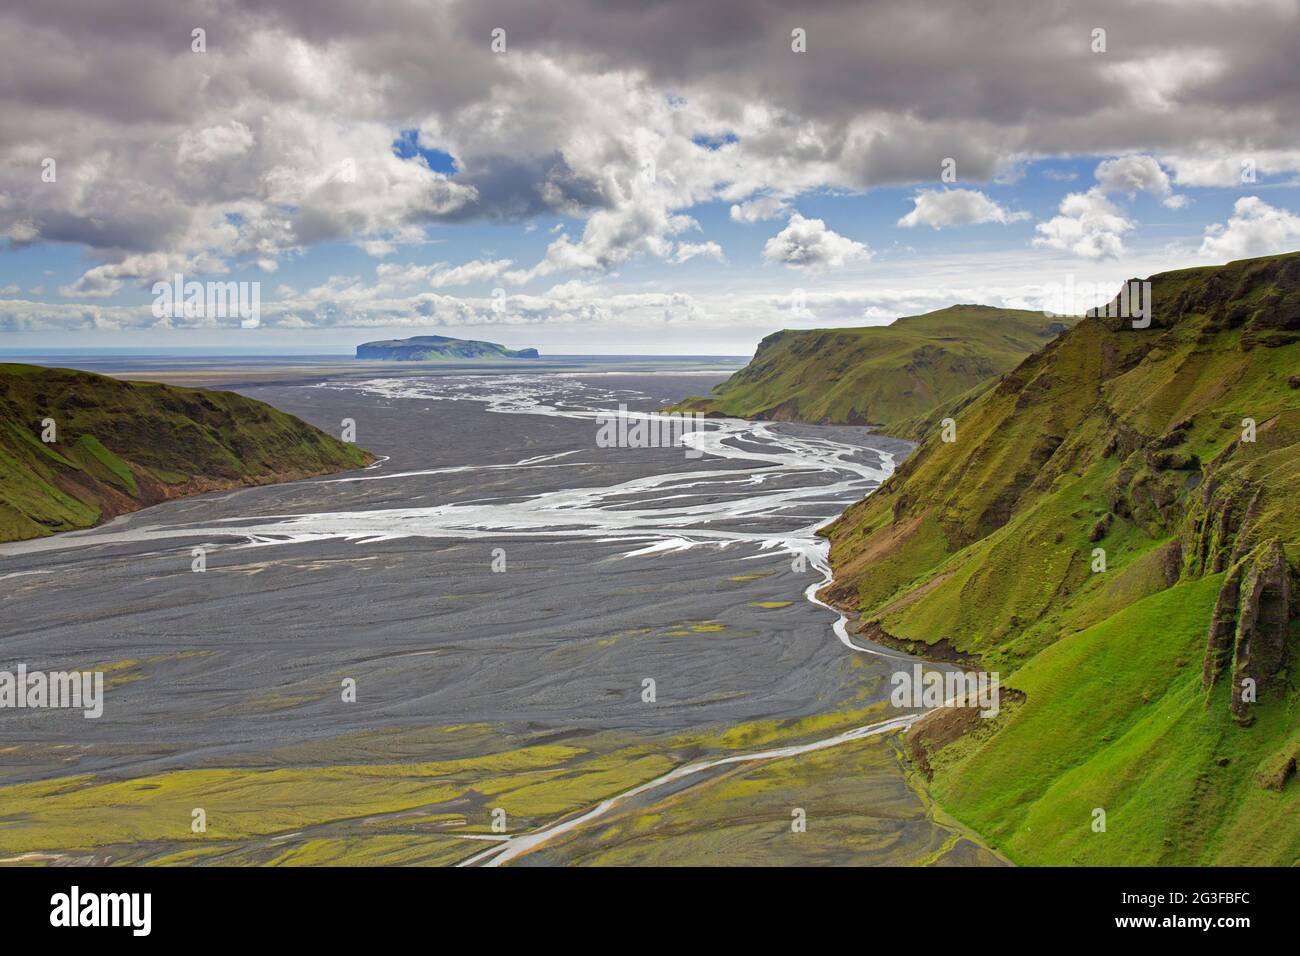 View over the glacial river Múlakvísl which draws its water from the Mýrdalsjökull, Sudurland on the western side of Mýrdalssandur, South Iceland Stock Photo